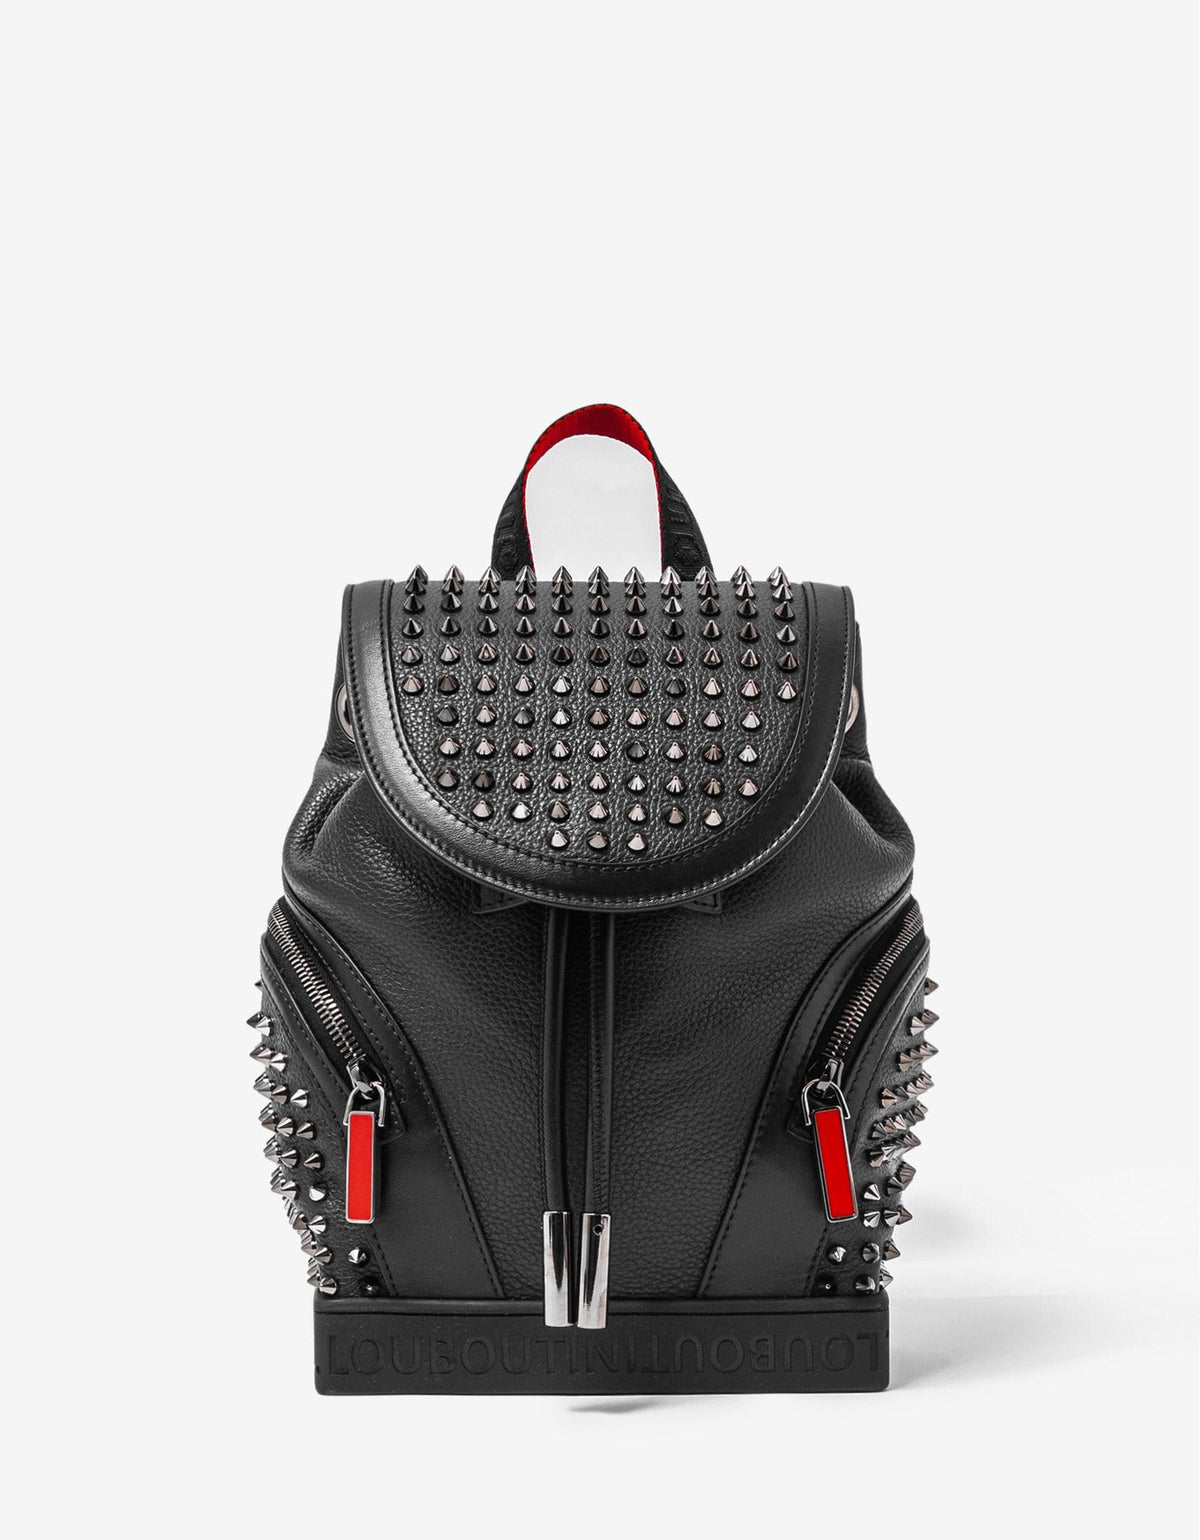 Christian Louboutin Explorafunk Small Black Leather Spikes Backpack